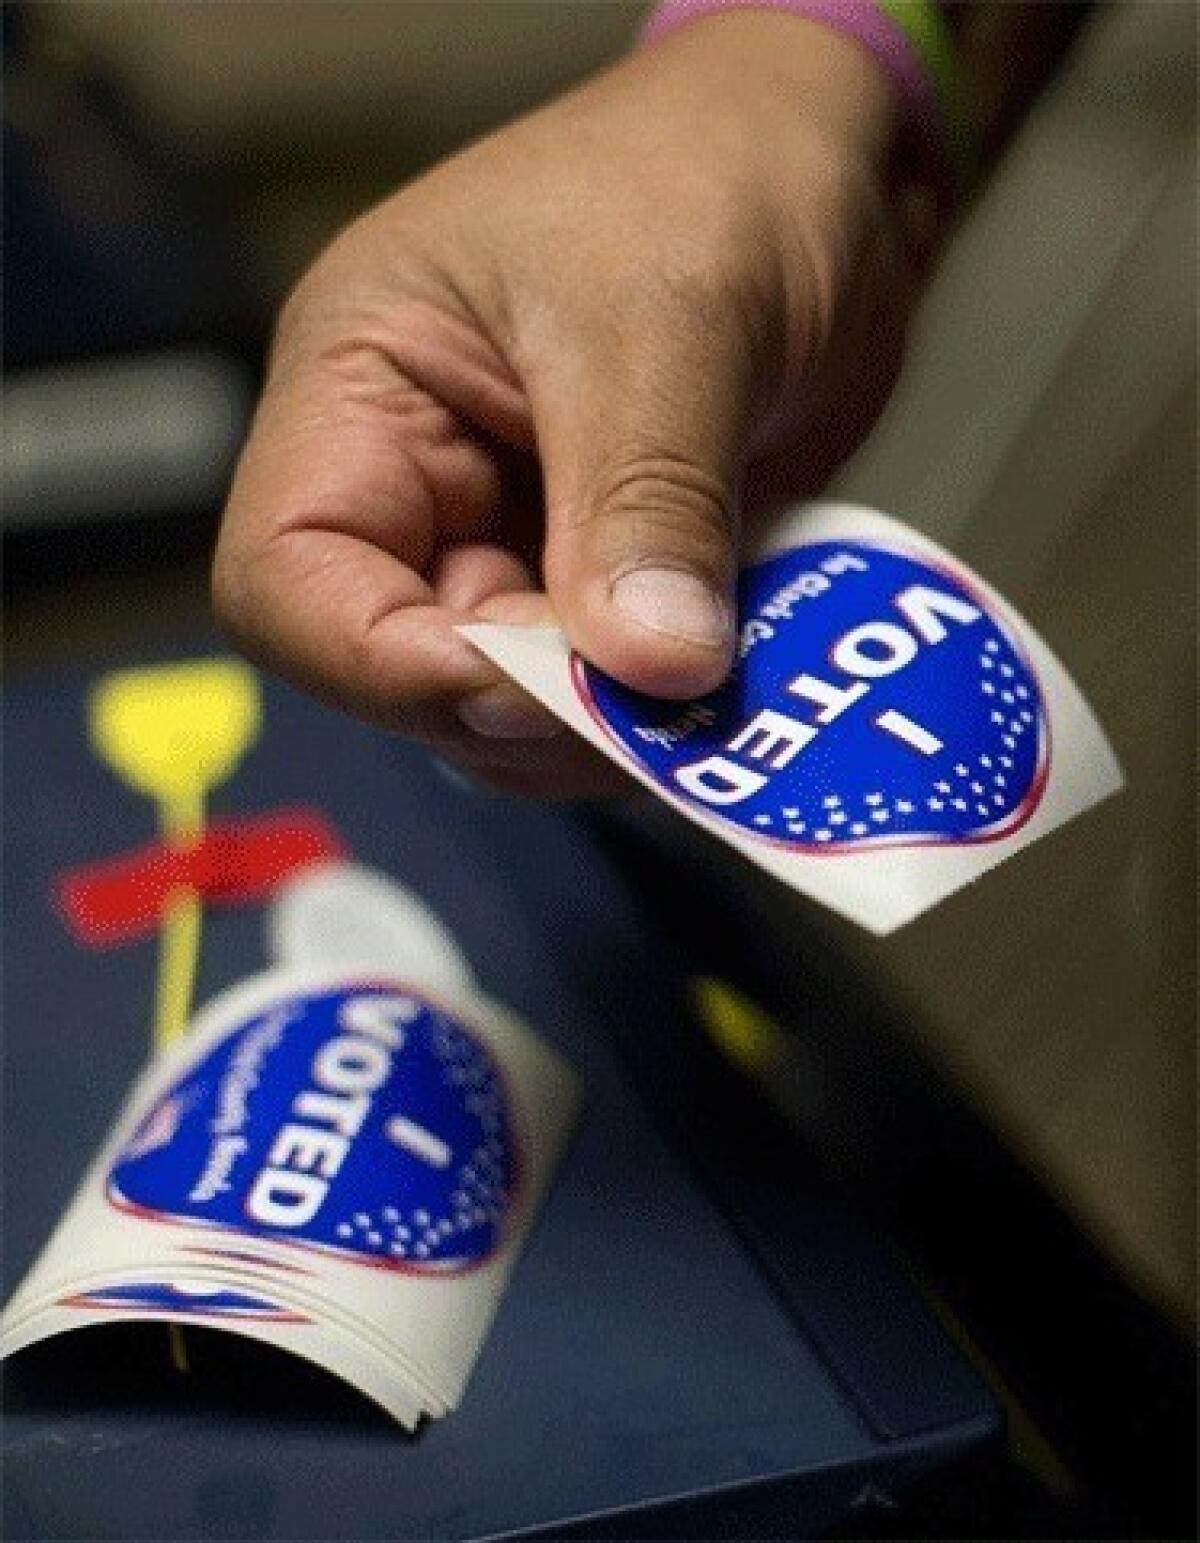 An election worker prepares voting stickers to hand out to voters in Las Vegas, Nev., where early voting in Nevada began on Oct. 20.